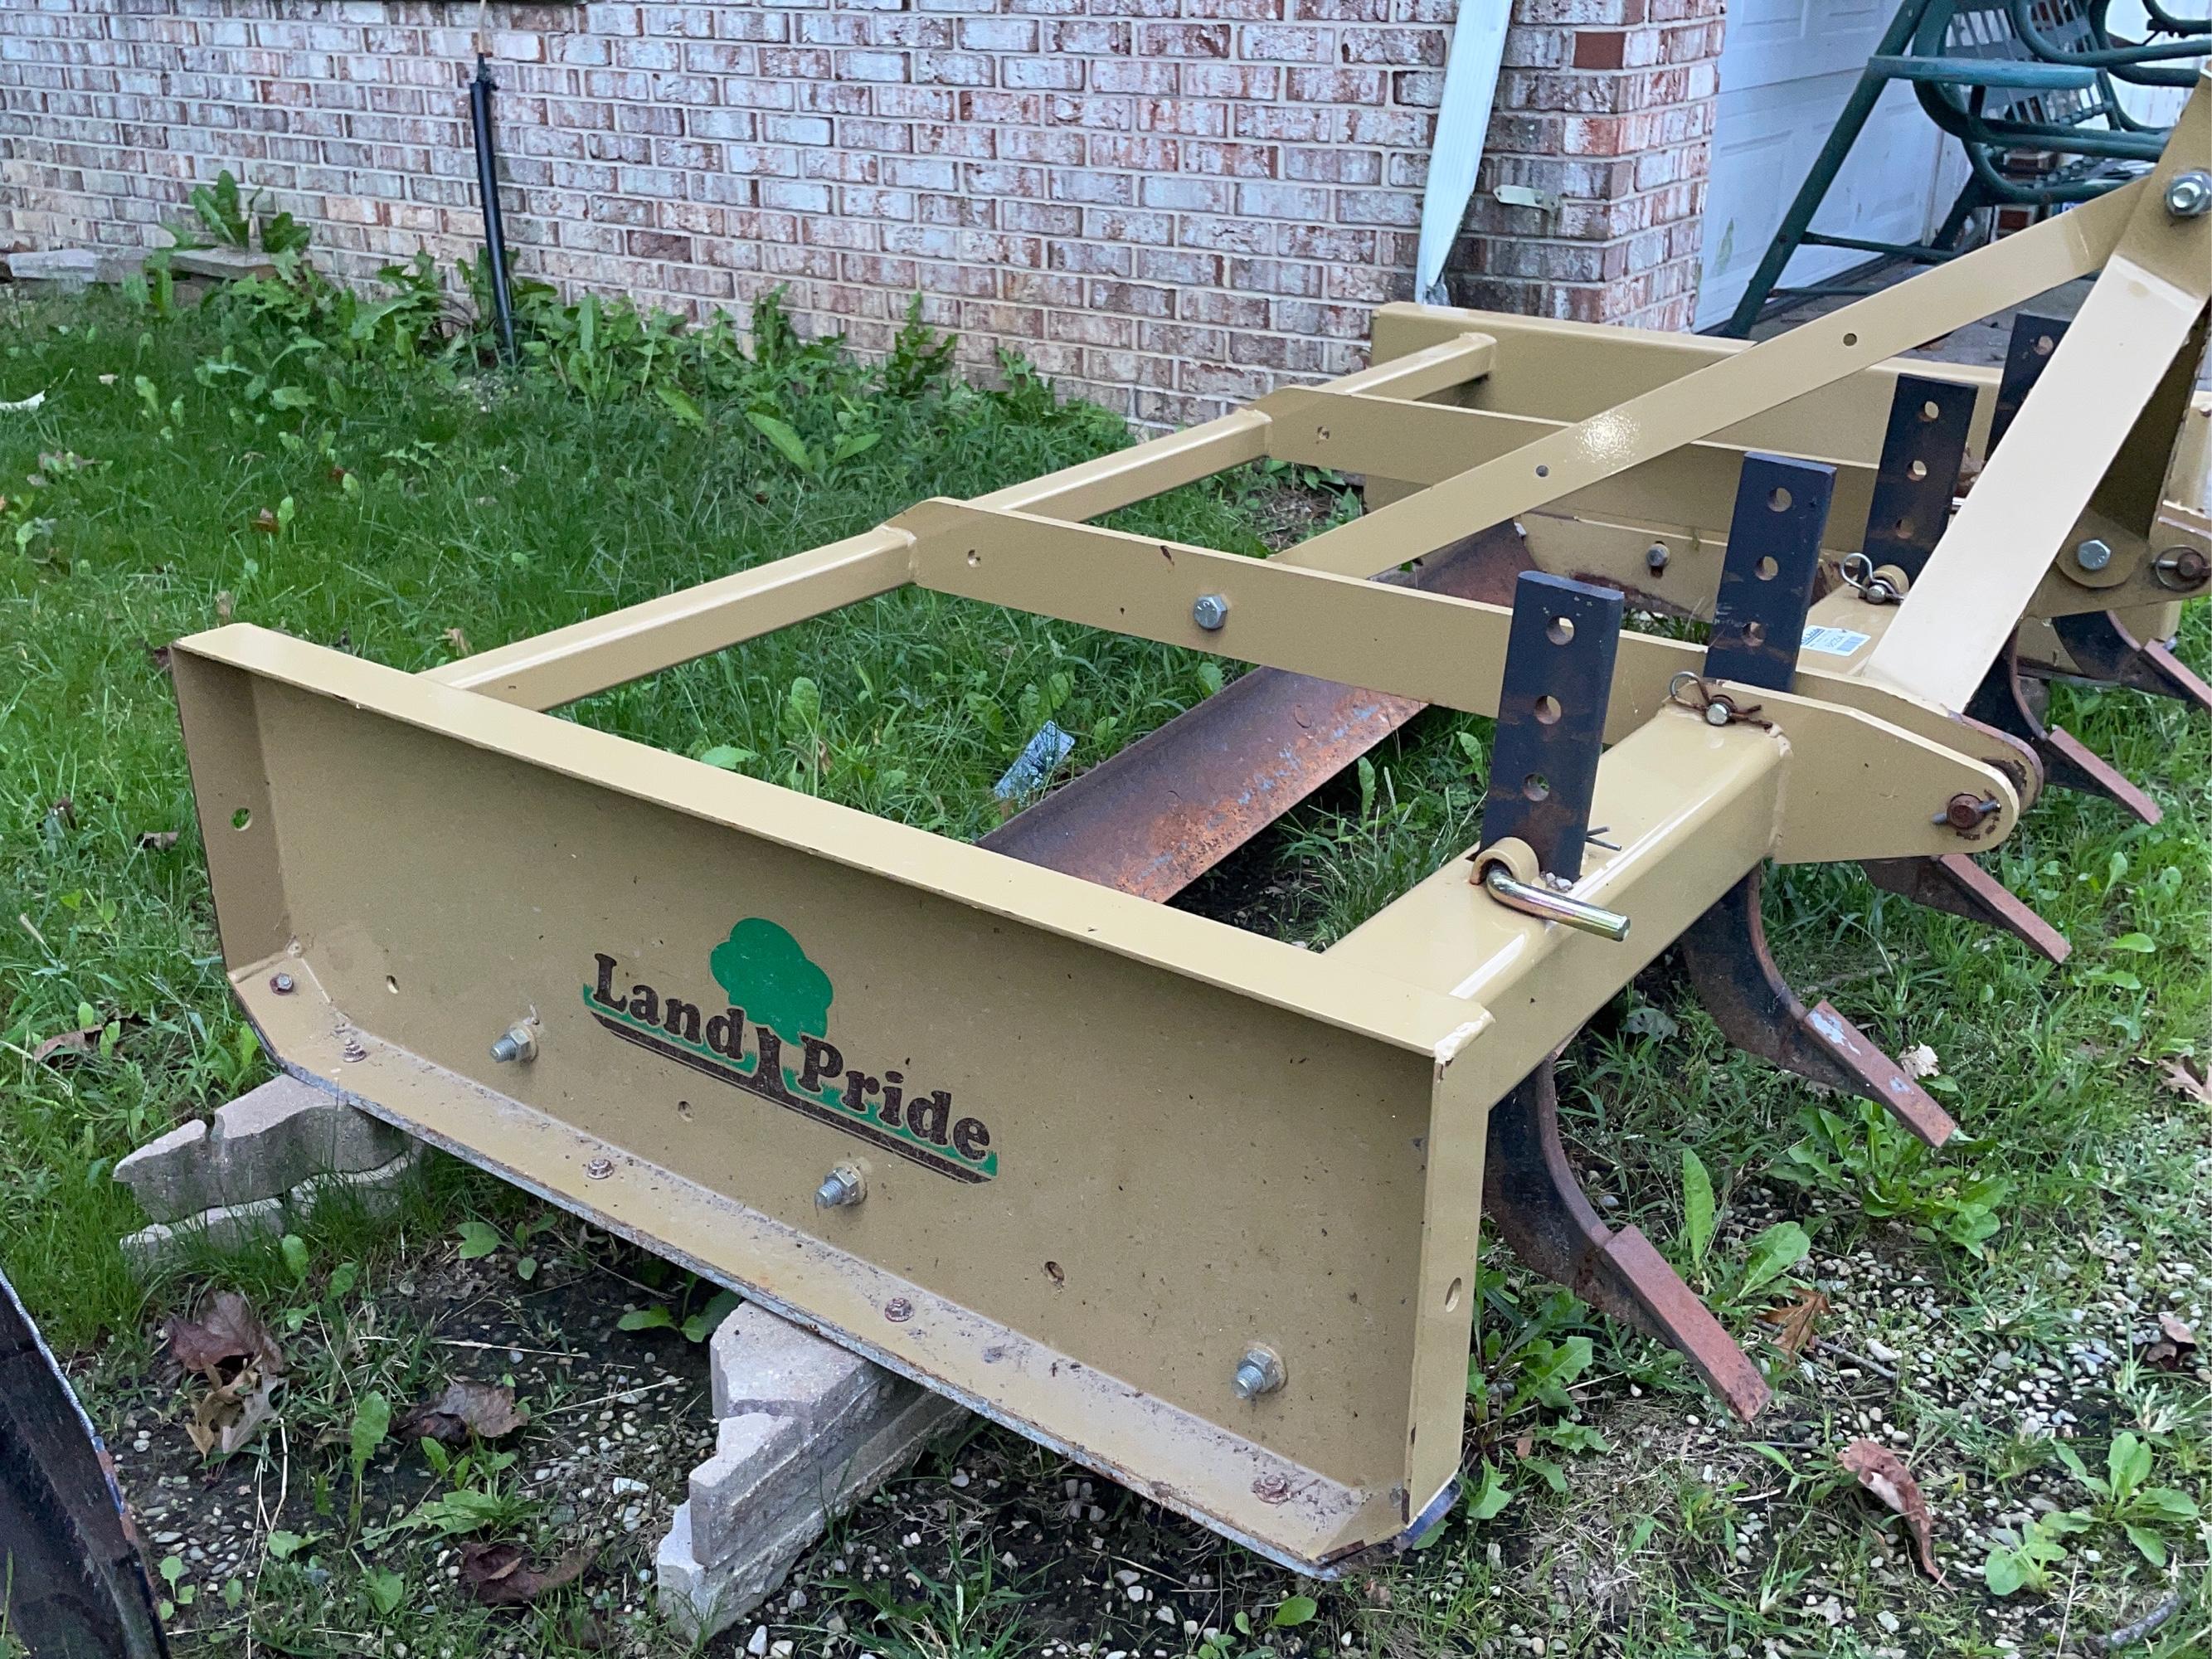 Land Pride Double Blade Groomer Box, 3 Point Hitch